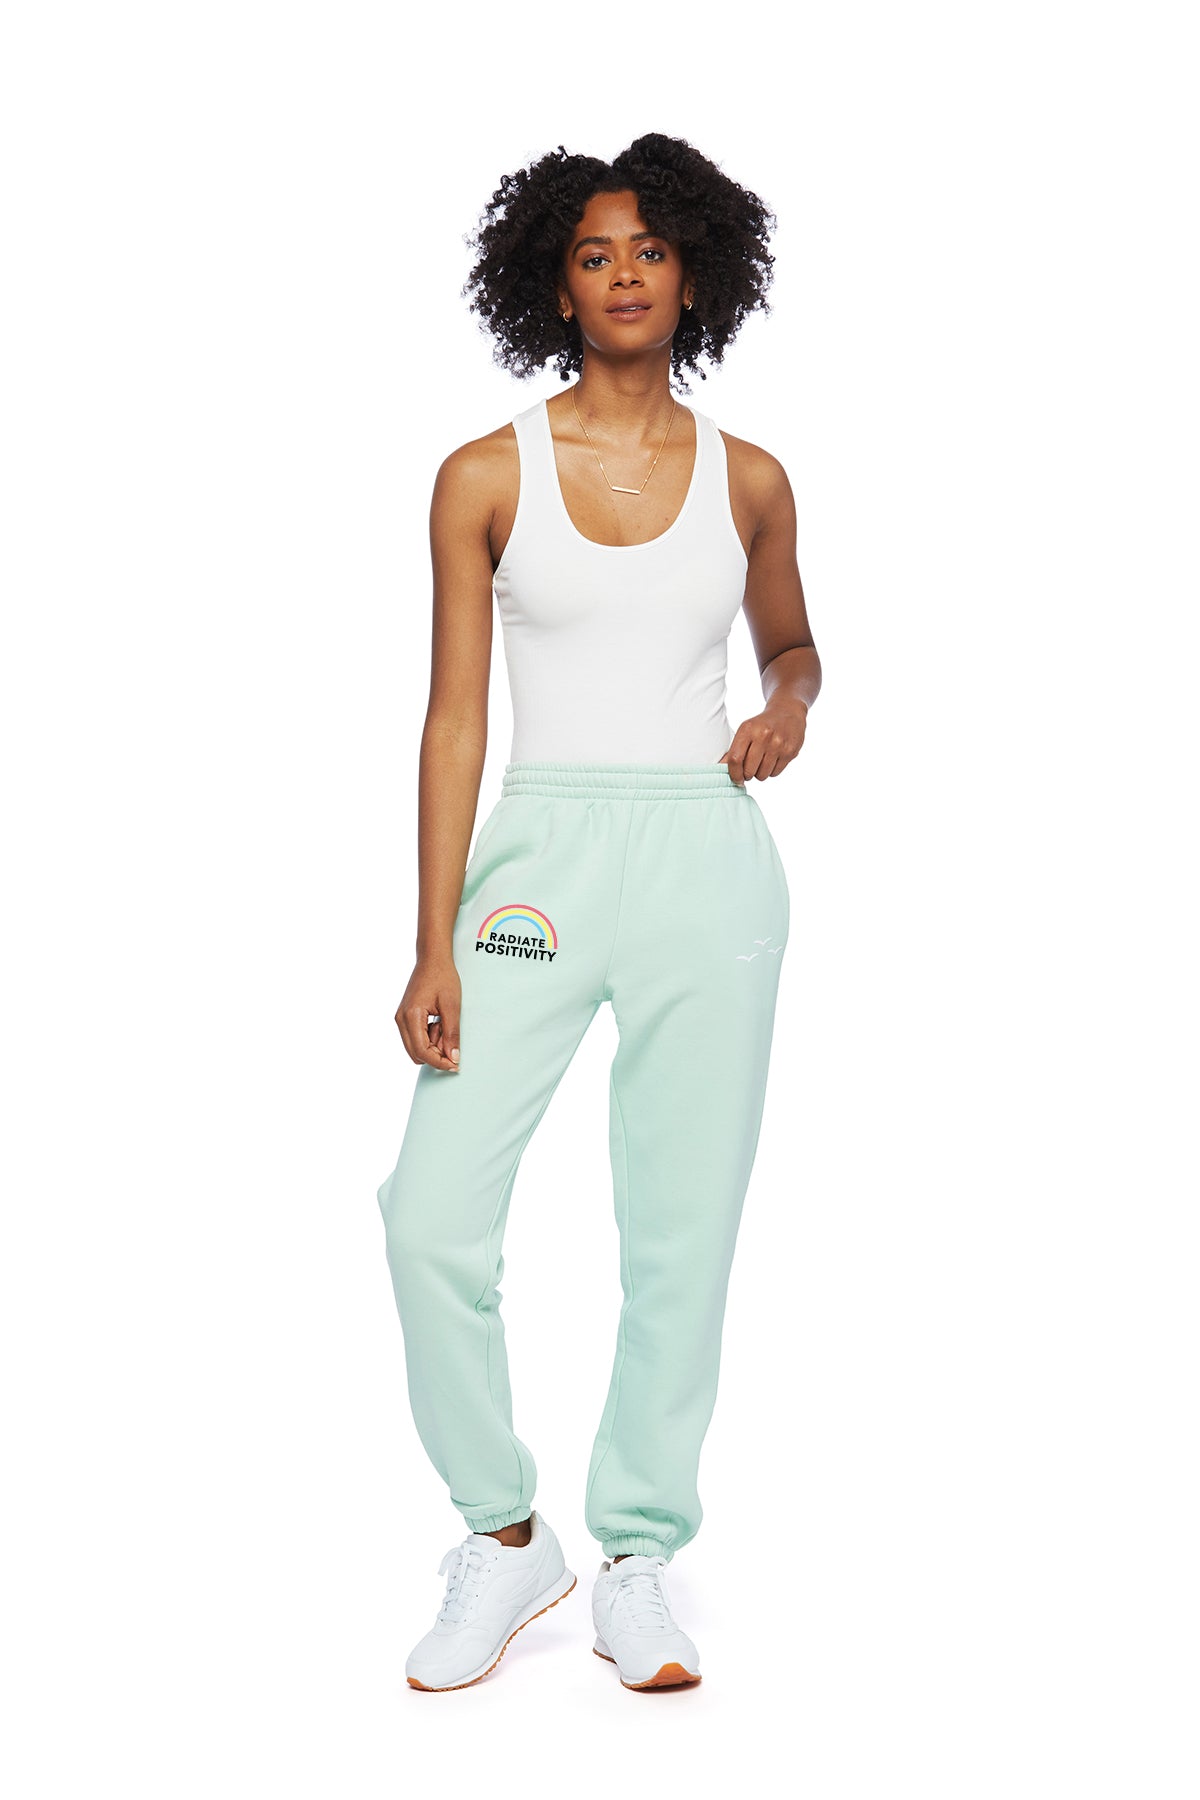 Nova Boyfriend Earth Day Jogger in Mint from Lazypants - always a great buy at a reasonable price.